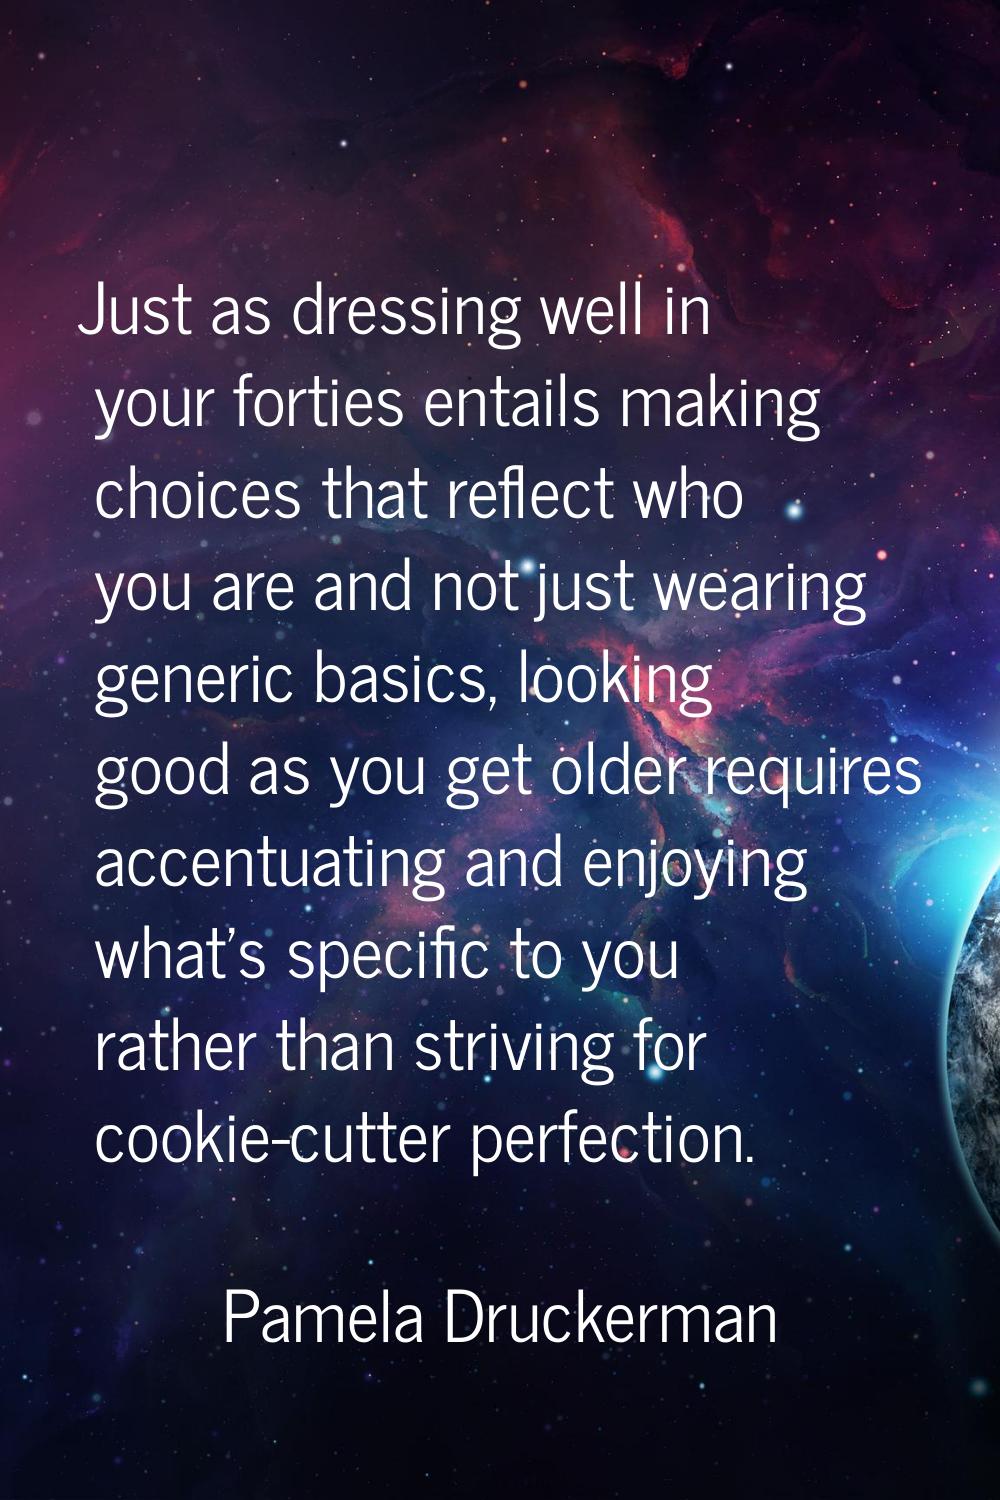 Just as dressing well in your forties entails making choices that reflect who you are and not just 